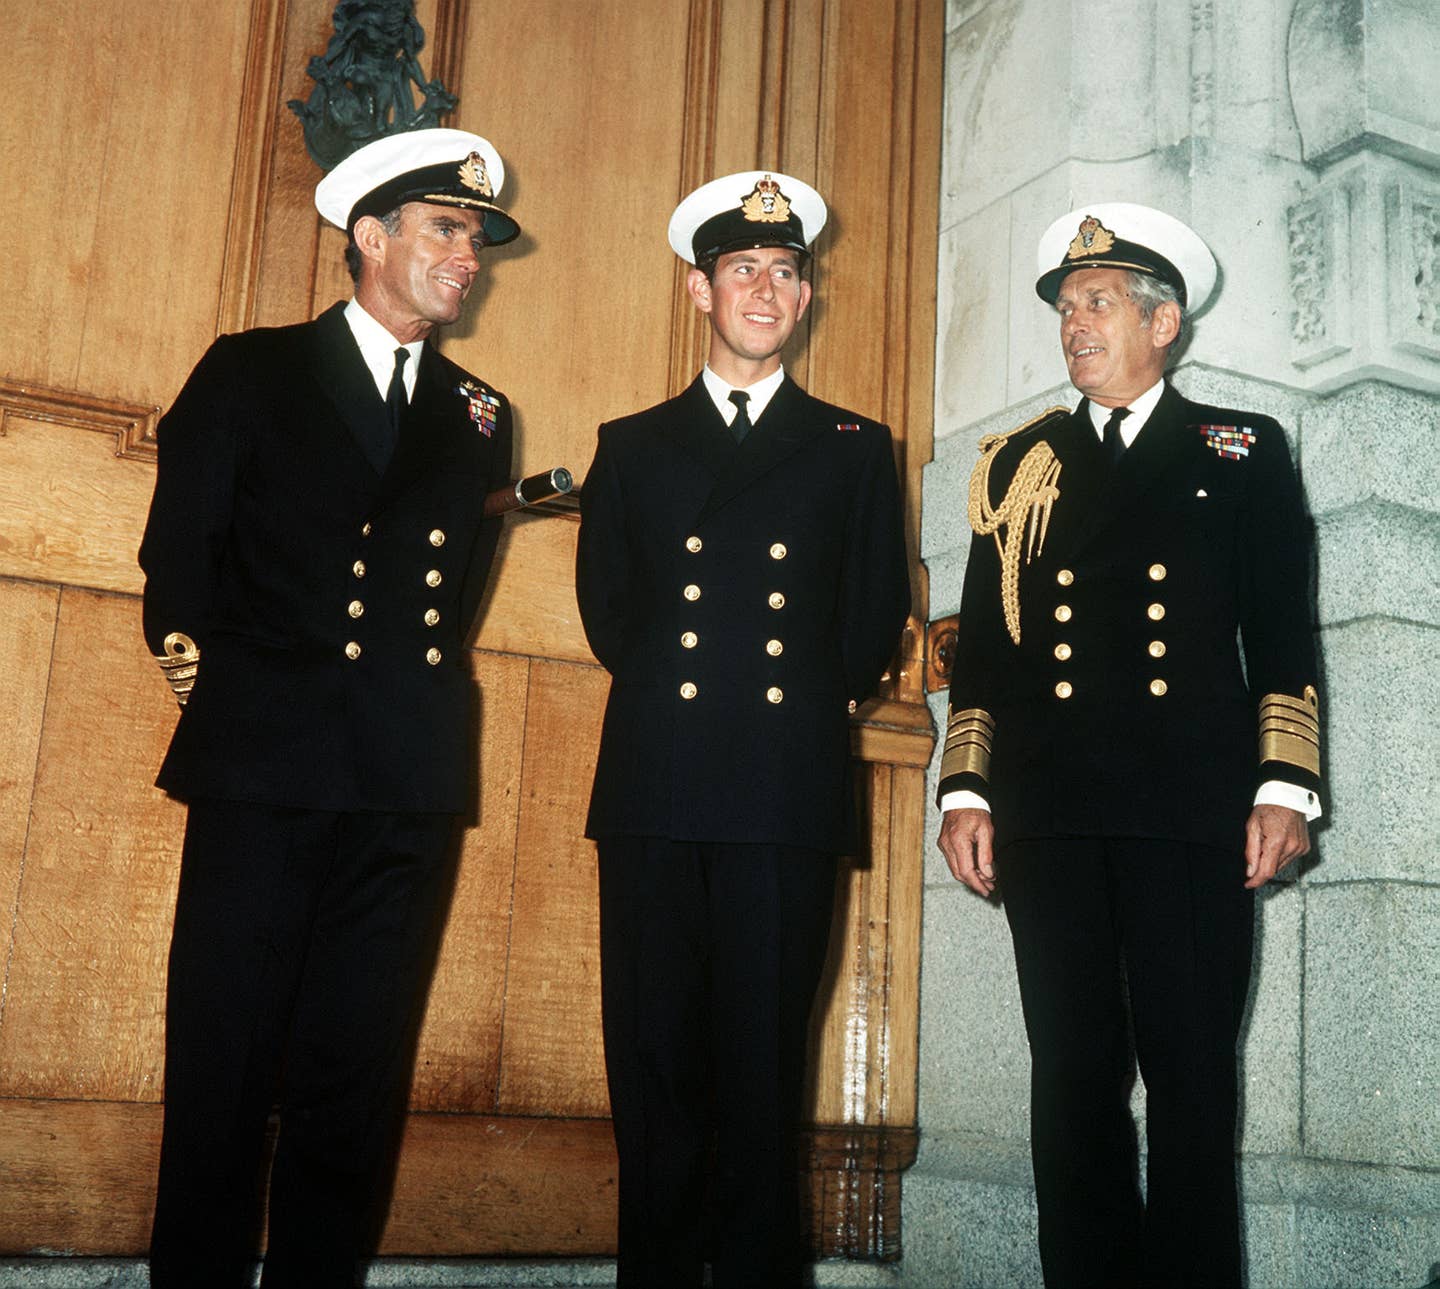 The then-Prince of Wales with Captain Allan Tait (L) and Admiral Sir Horace Law at the Brittania Ryal Naval College, Dartmouth, where the prince began a six-week graduate course. (Royal family photo)